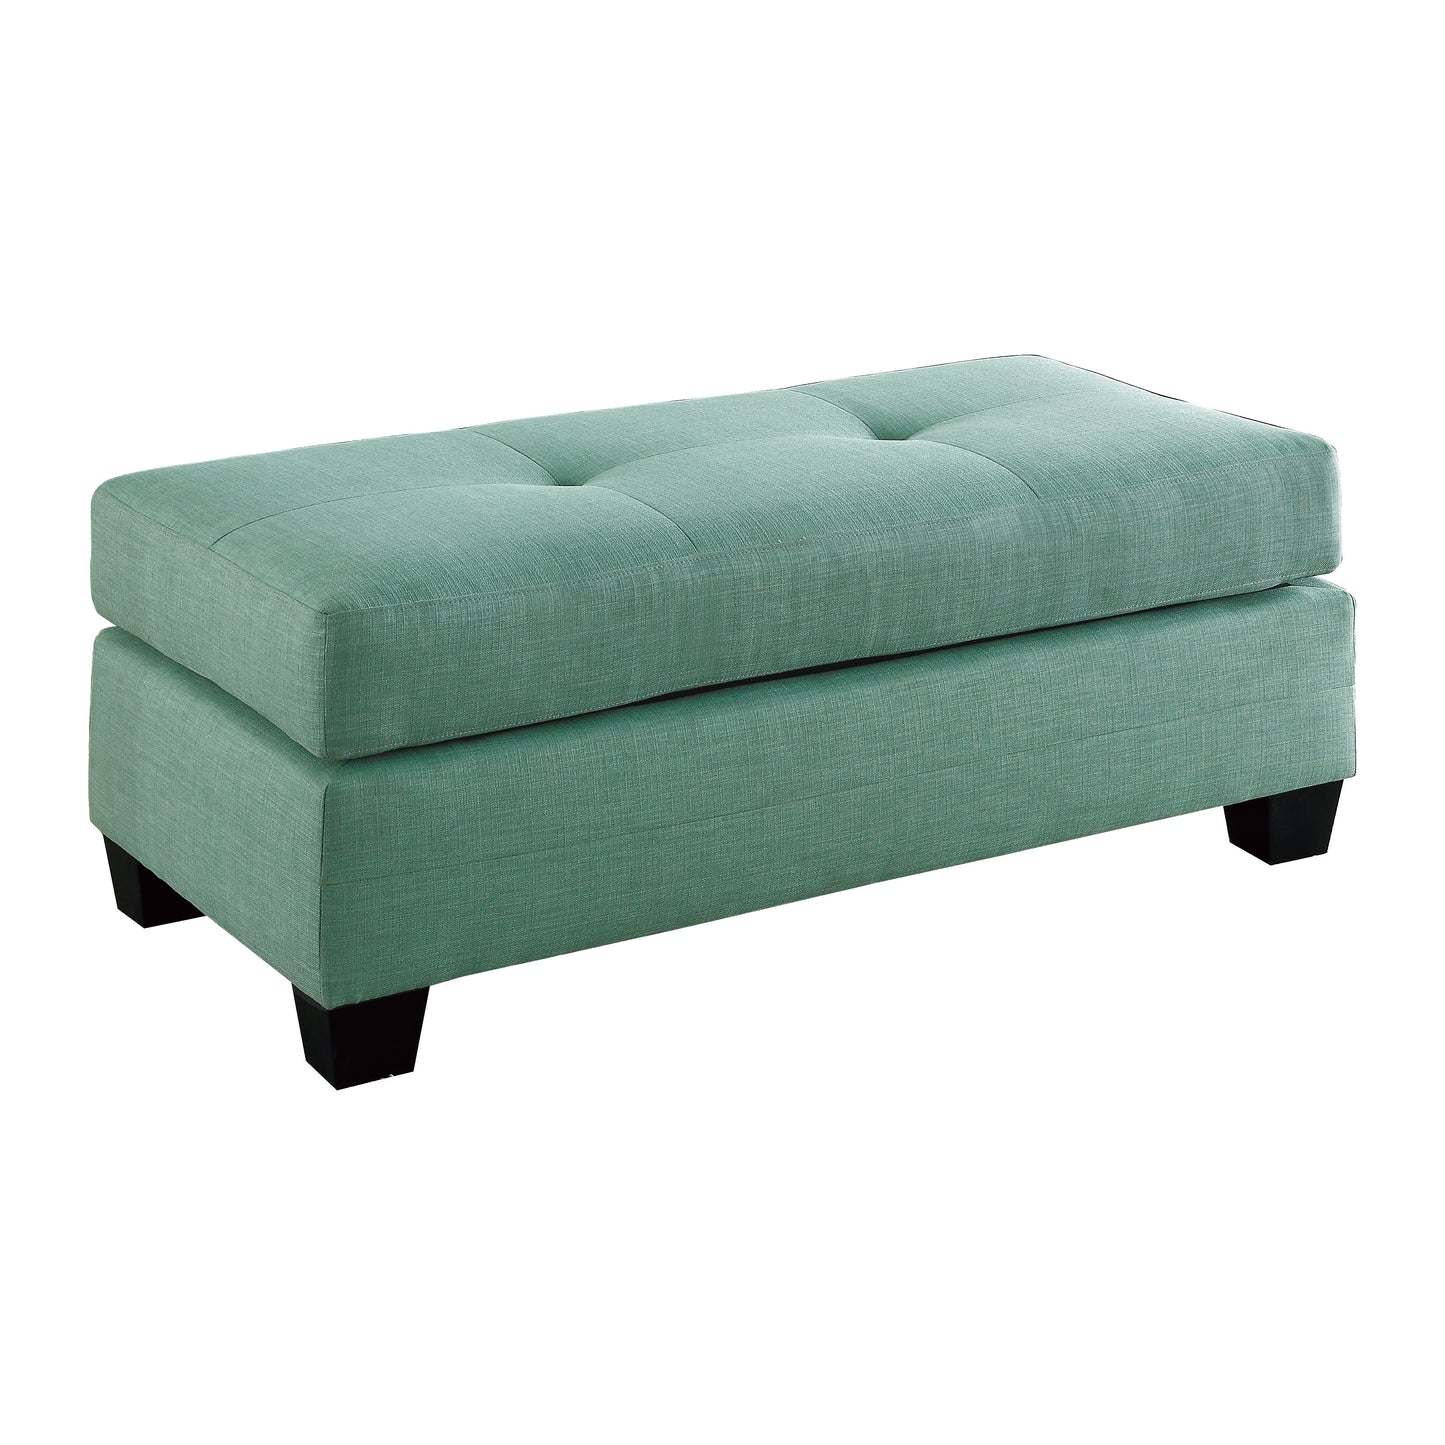 Phelps Ottoman CLEARANCE WHILE SUPPLIES LAST